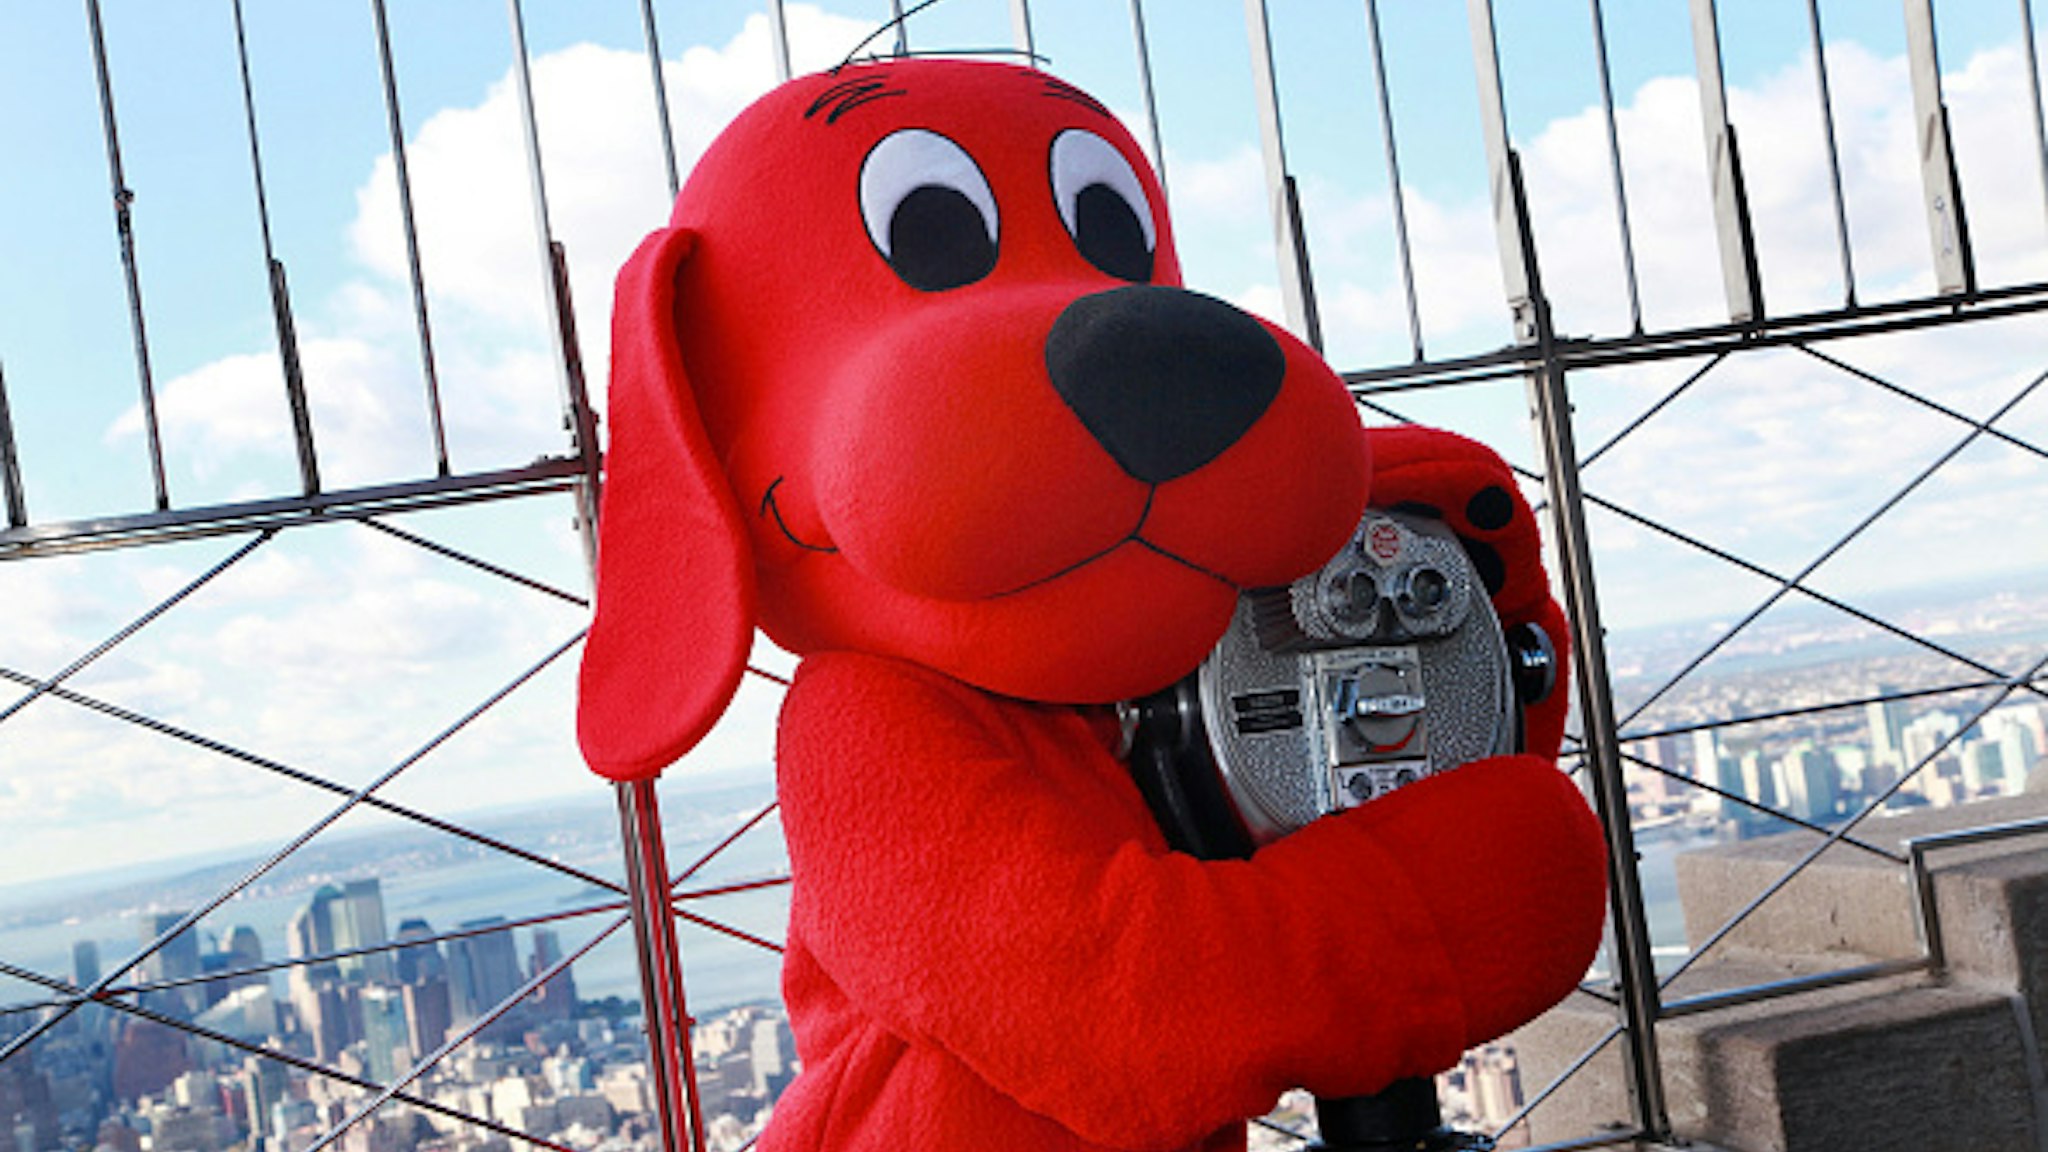 Clifford the Big Red Dog lights The Empire State Building on October 22, 2010 in New York City.